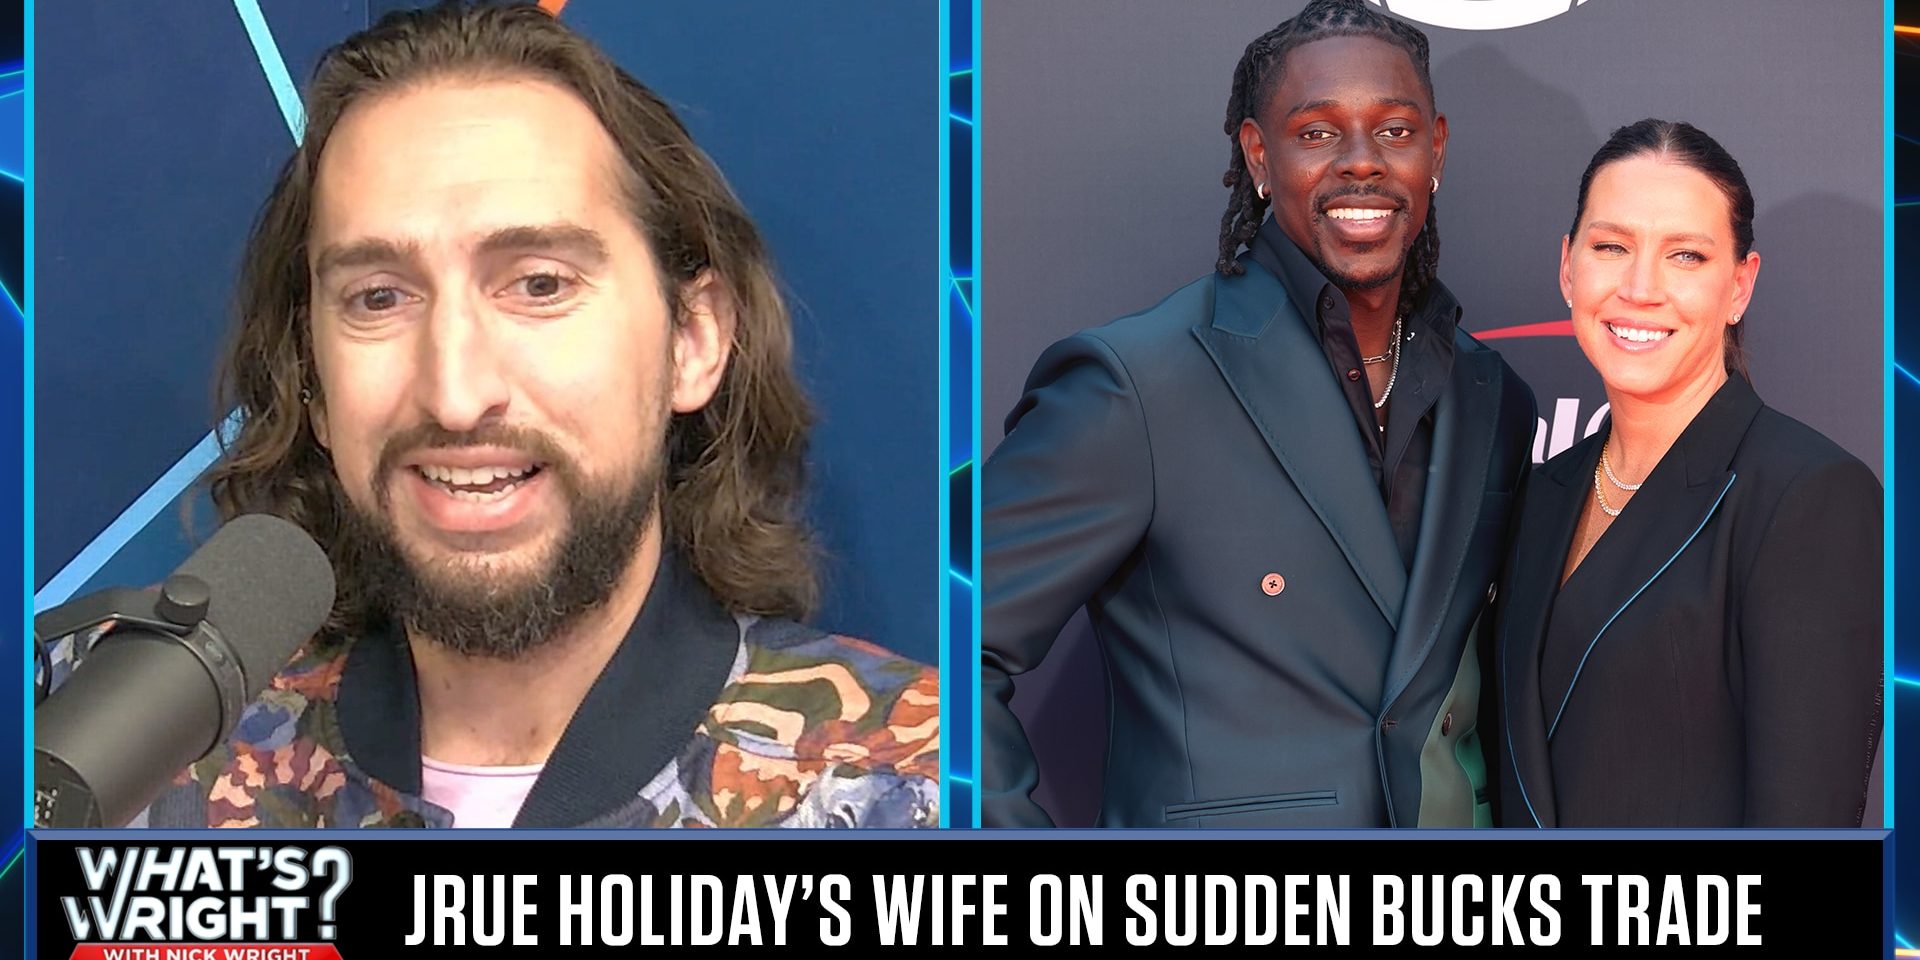 Jrue Holiday's wife calls sudden trade to Boston 'personal' | What's Wright?